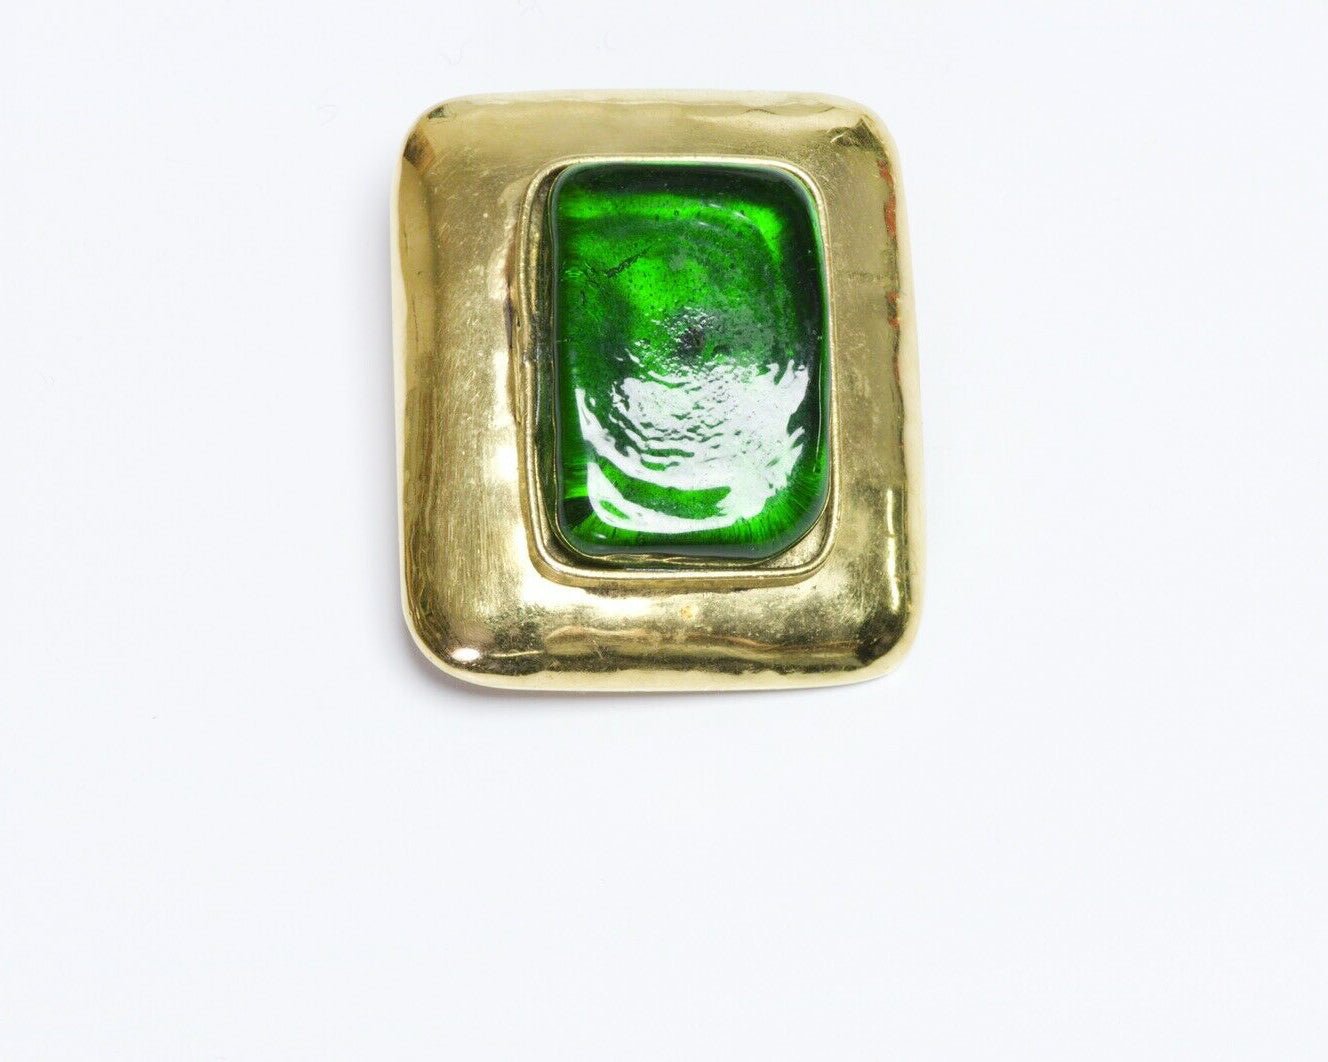 Frances Patiky Stein FPS Paris 1980’s Gold Plated Green Poured Glass Brooch - DSF Antique Jewelry